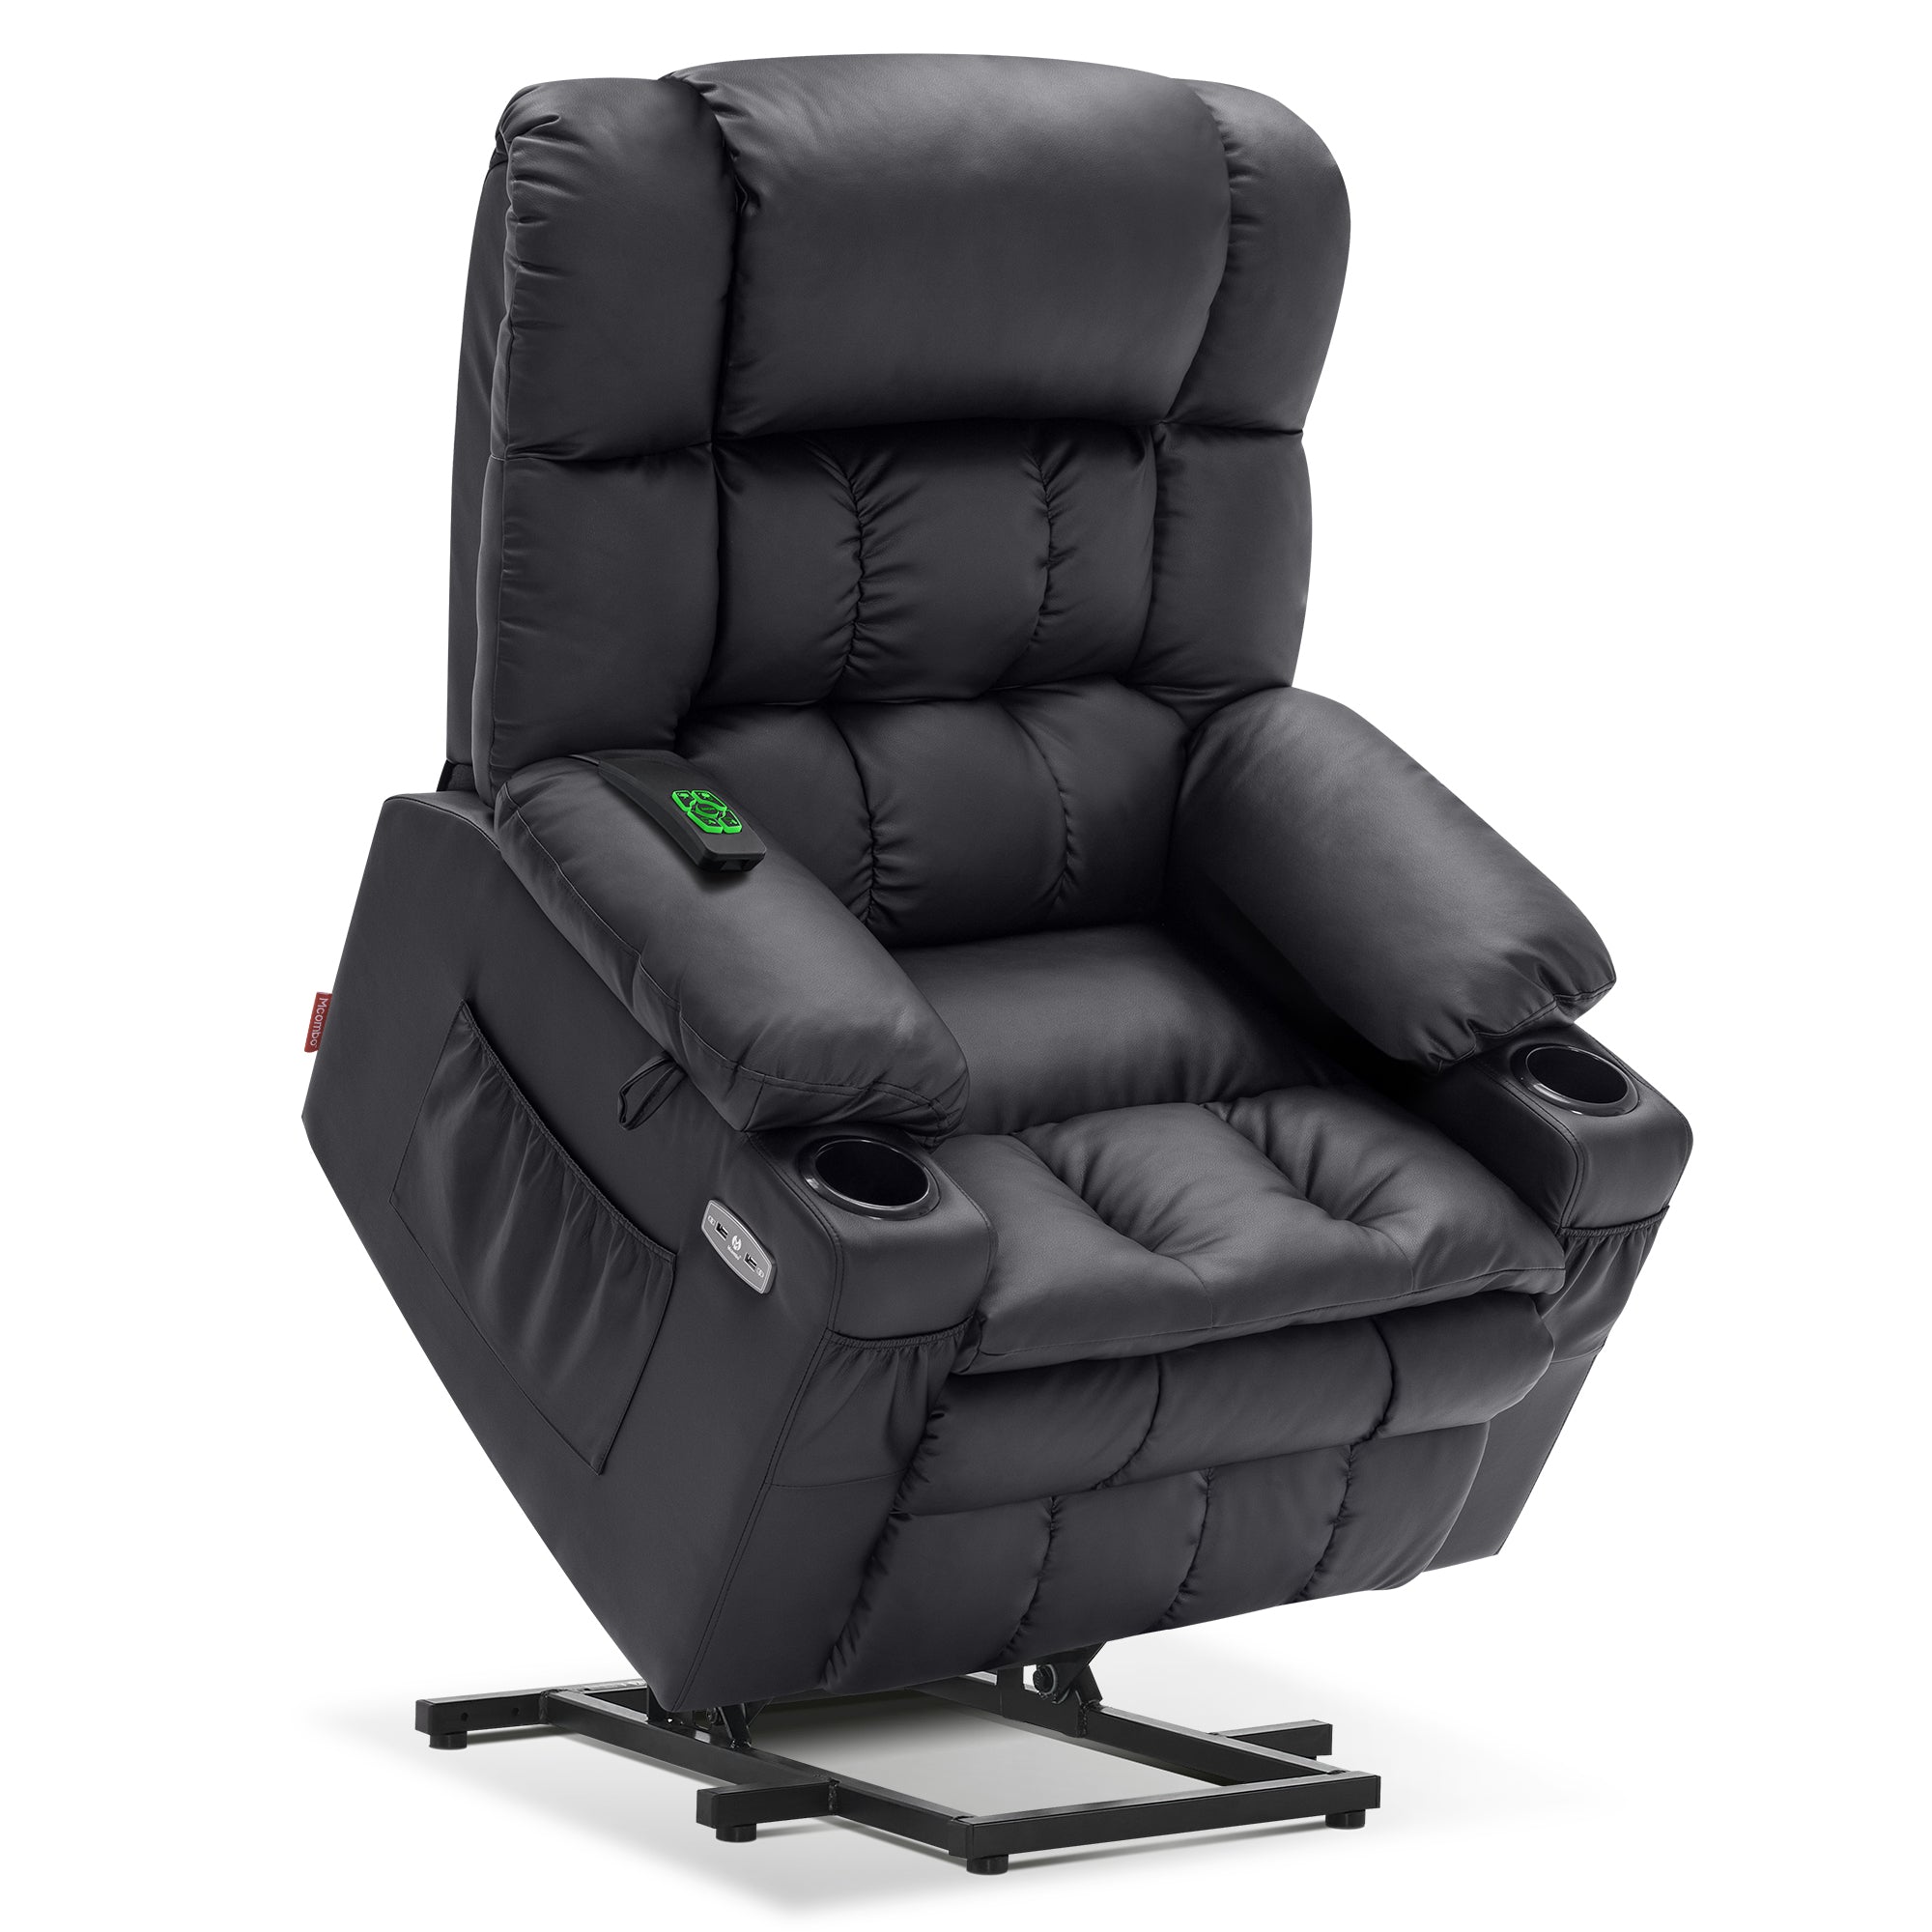 MCombo Dual Motor Power Lift Recliner Chair with Massage and Heat for Elderly People, Infinite Position, USB Ports, Cup Holders, Extended Footrest, Faux Leather 7890 Series